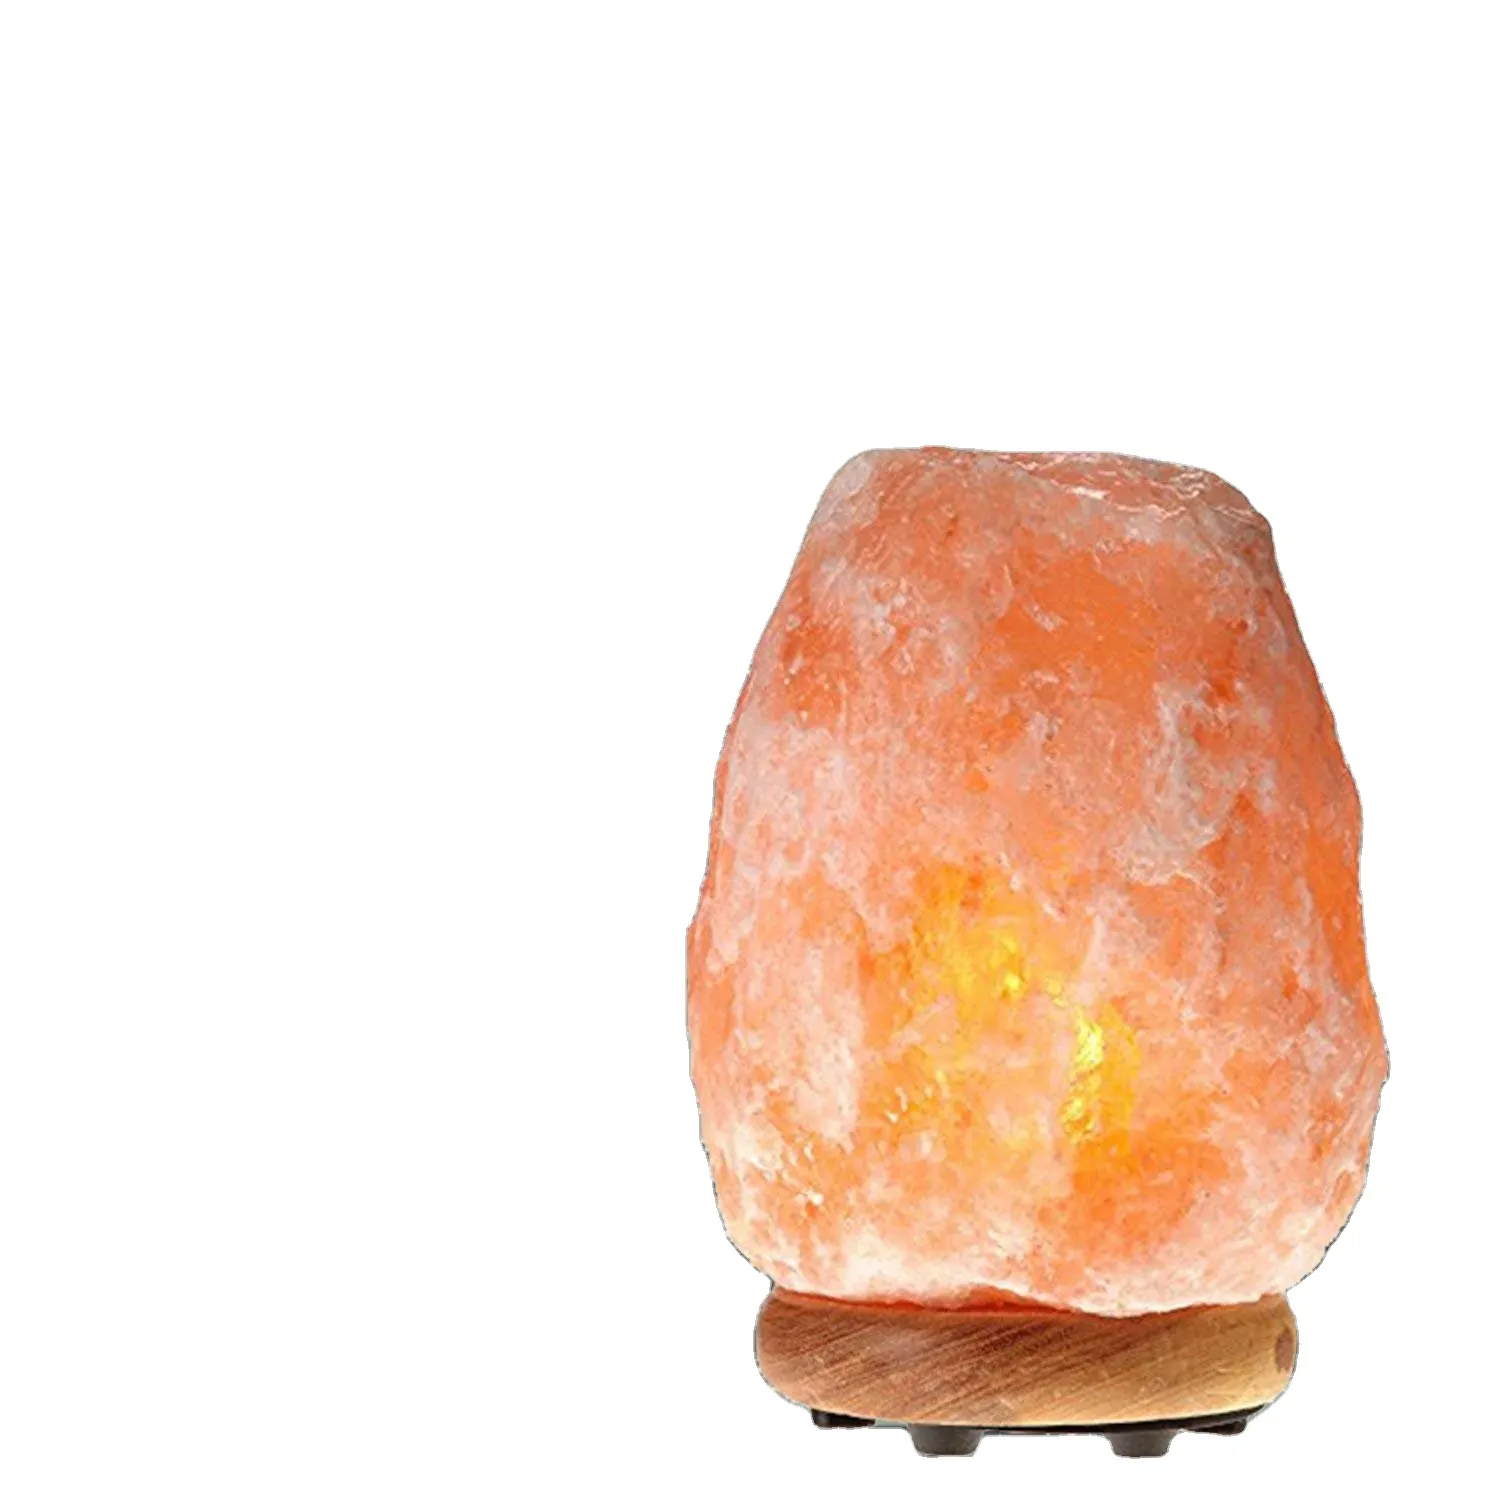 Himalayan Salt Lamp 100% pure Natural Hand Carved Himalayan Orange Salt Lamp with wooden stands Wholesale in bulk packaging